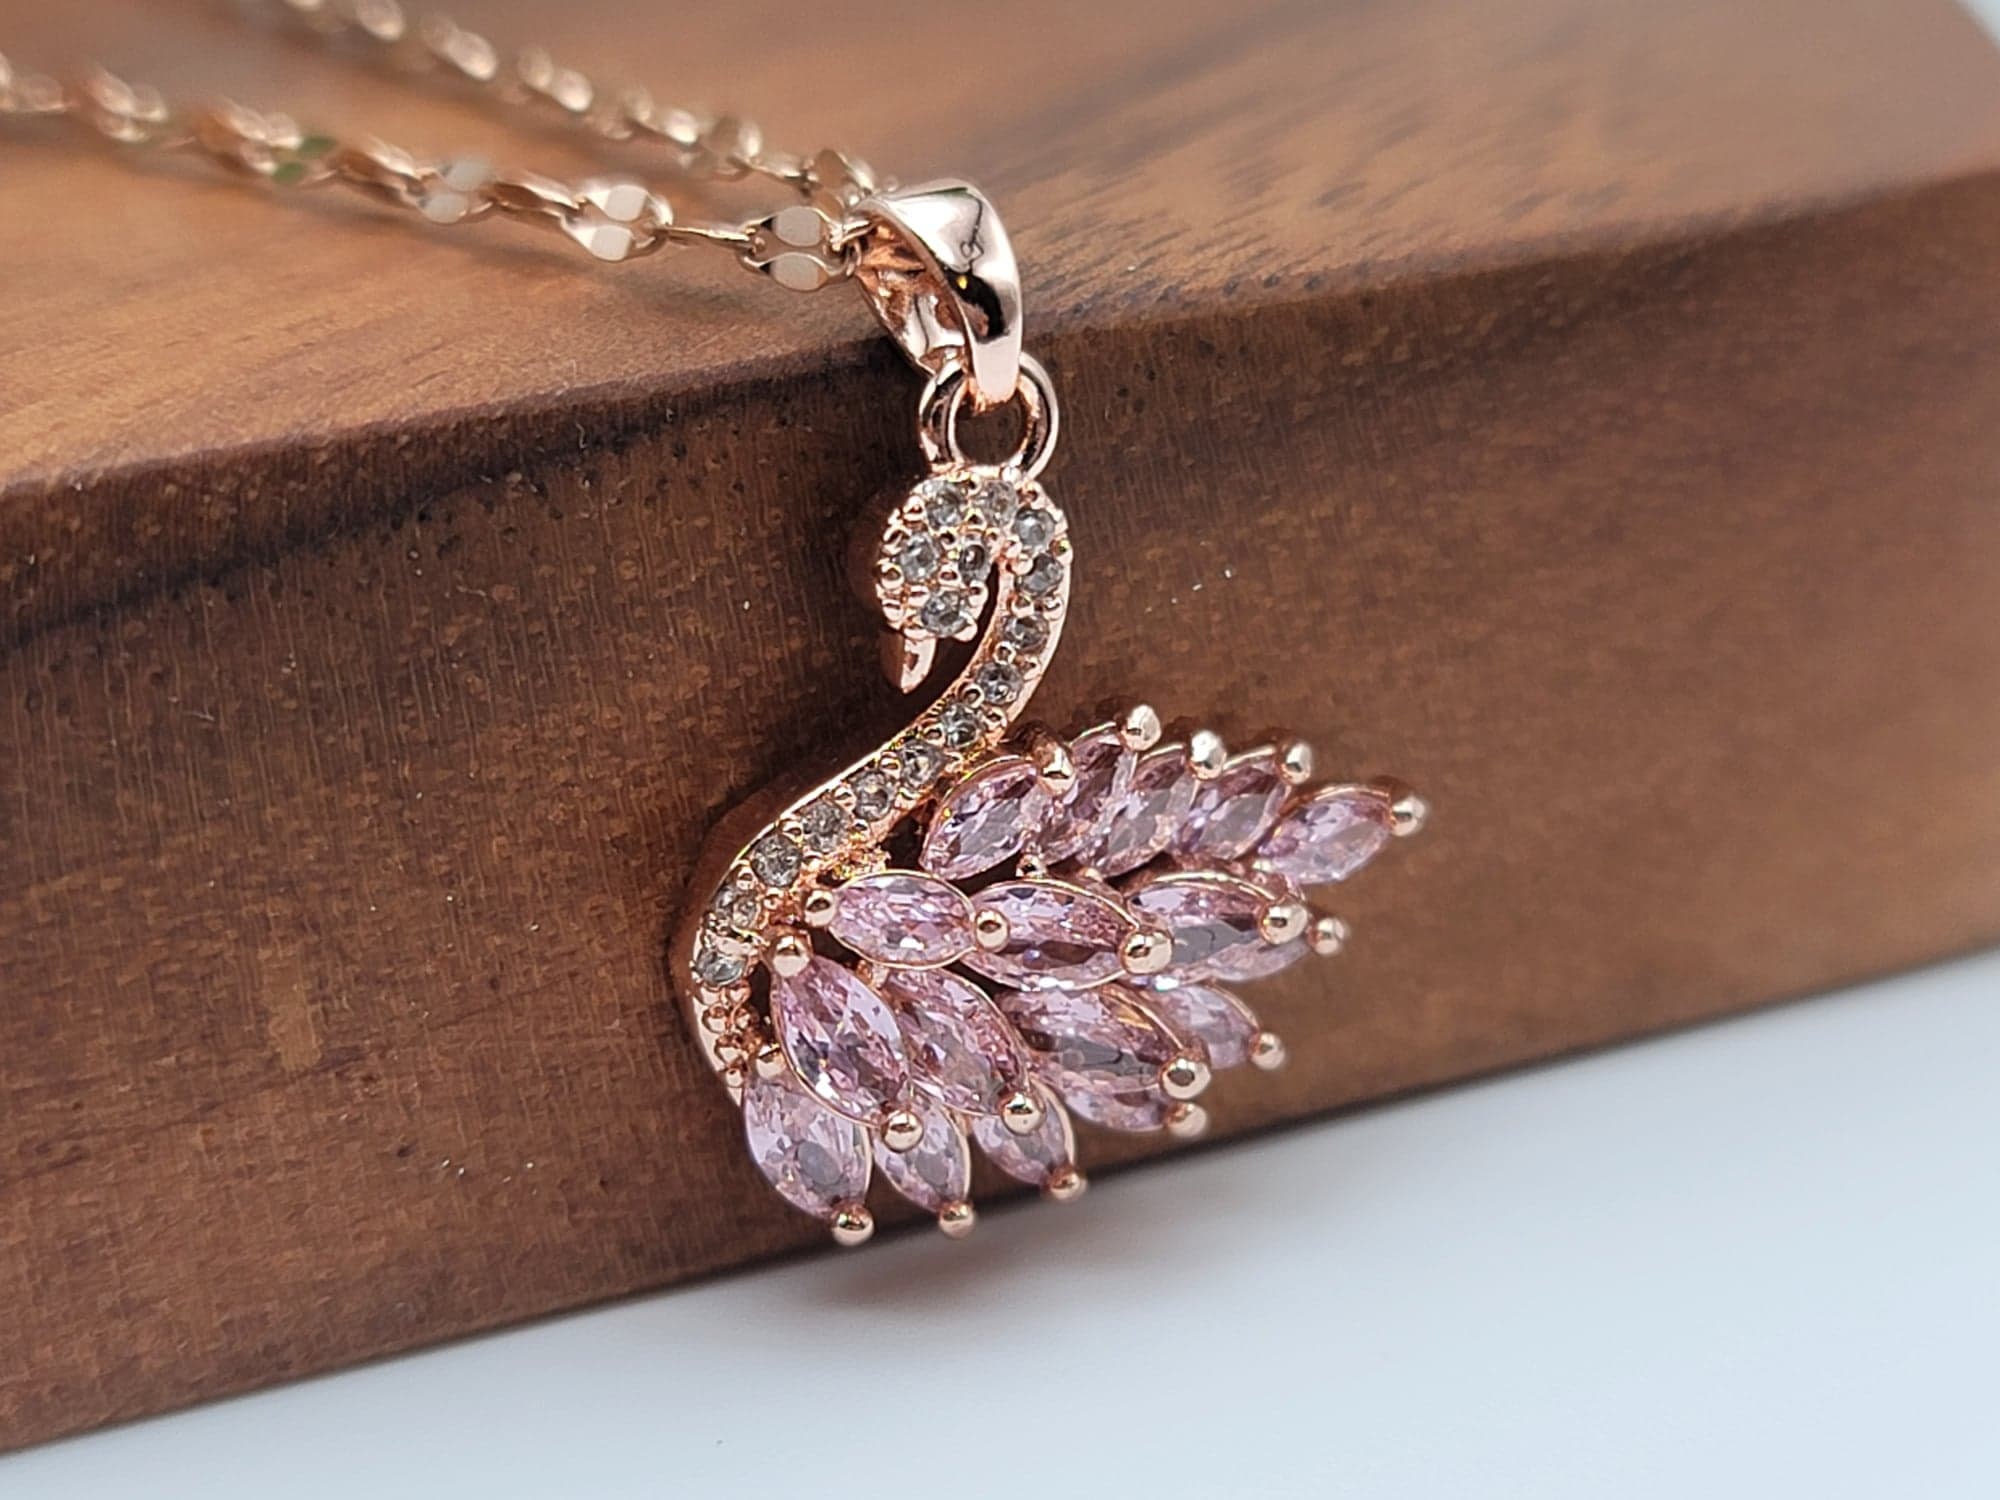 Buy ELLIPSTORE Trending Serene Swan Necklace with Embedded Diamonds, Rose  Gold Jewelry, Statement Jewelry at Amazon.in